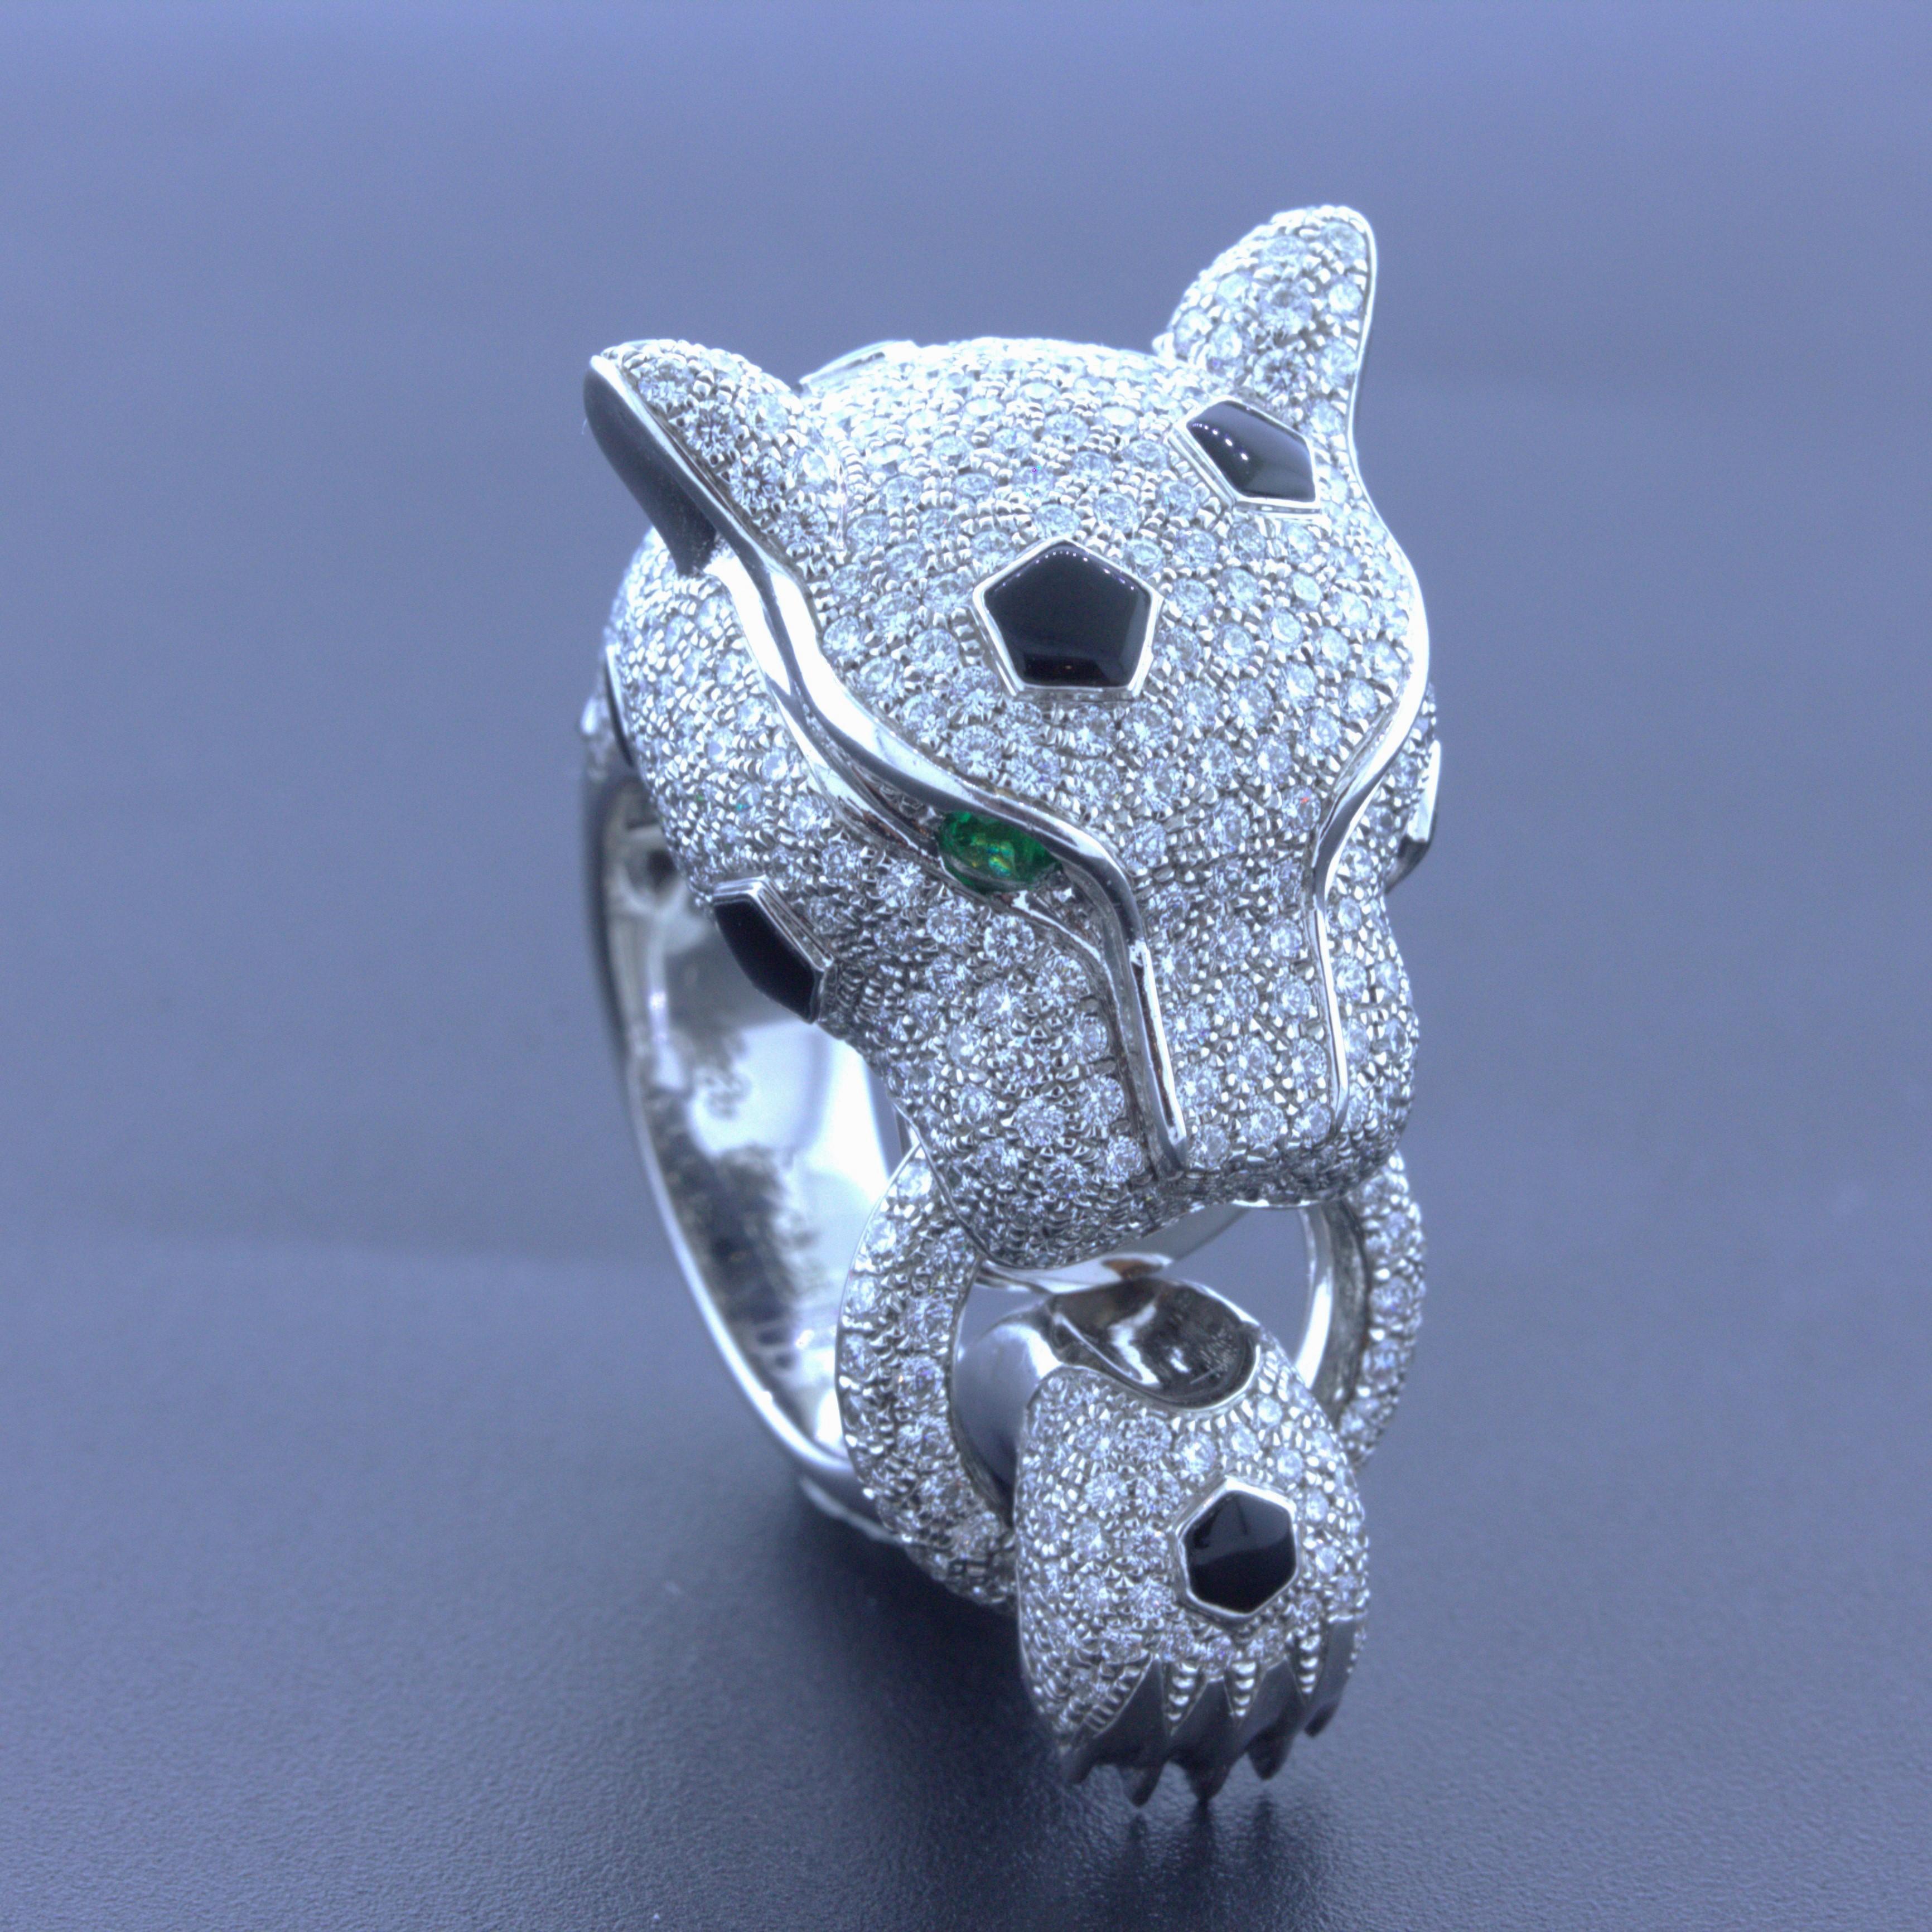 A large and lifelike panther studded with diamonds is ready to sit atop your fingers! The panther constructed in 18k white gold is covered with 3.18 carats of bright white round brilliant-cut diamonds. There are spots of hand-polished black onyx